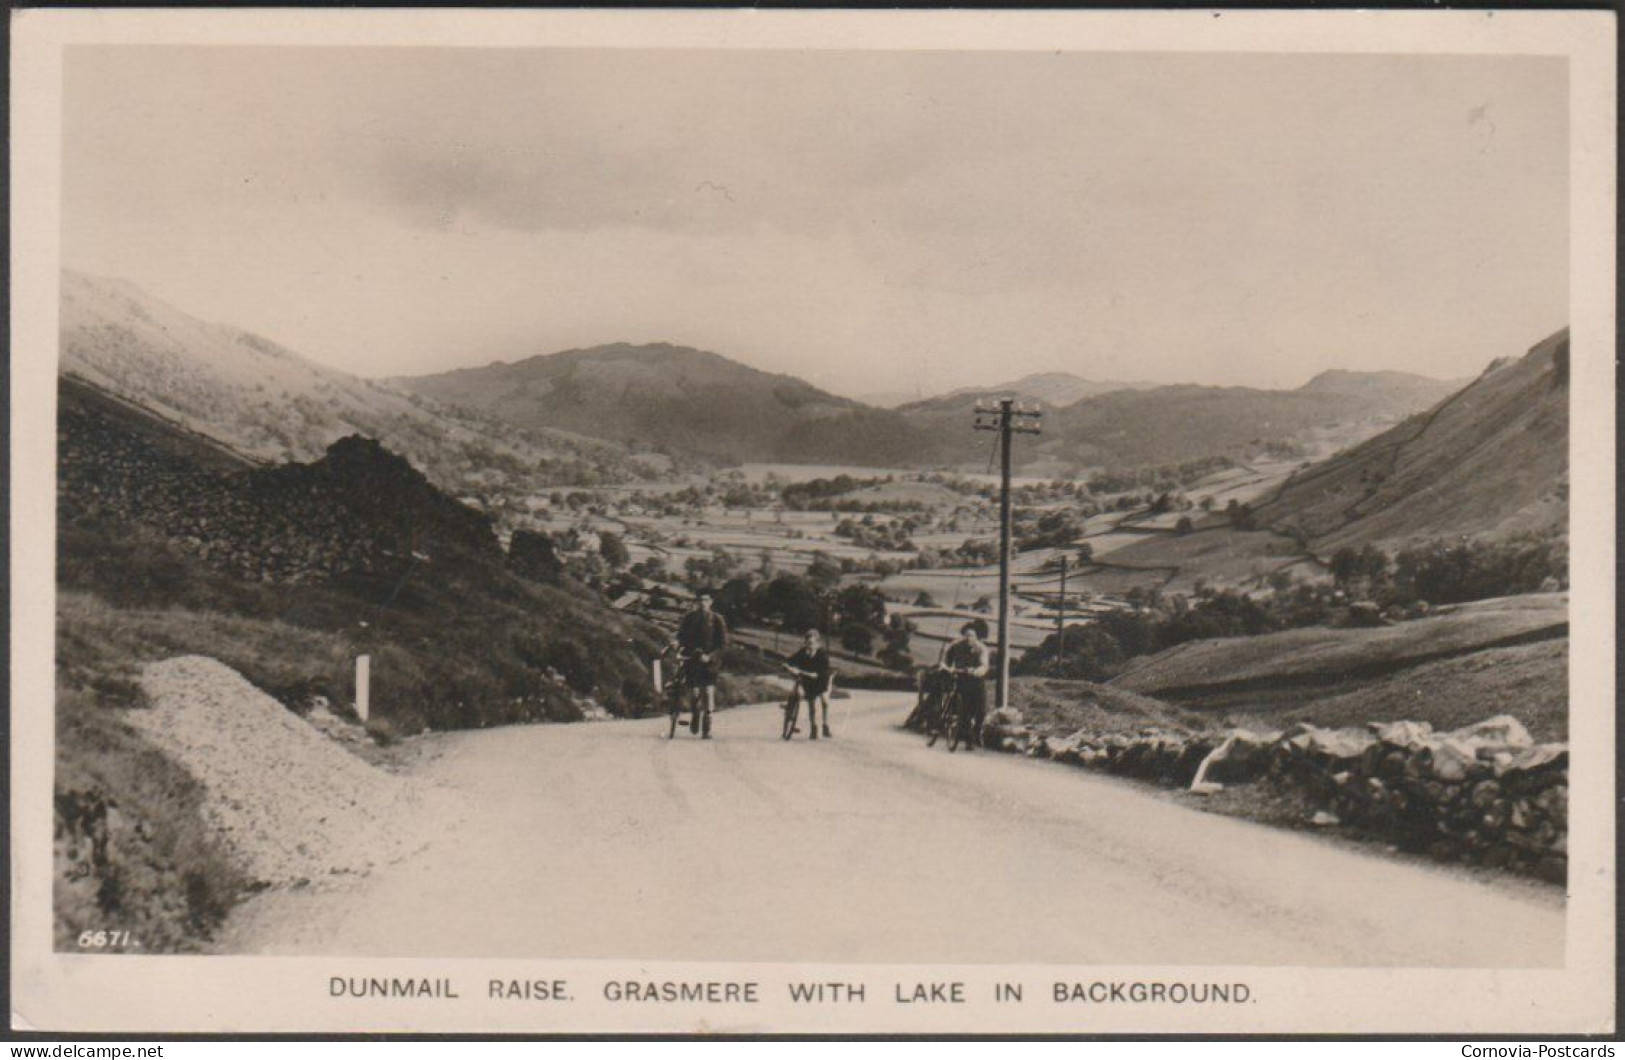 Dunmail Raise, Grasmere, With Lake In Background, Westmorland, 1946 - Aero Pictorial RP Postcard - Grasmere